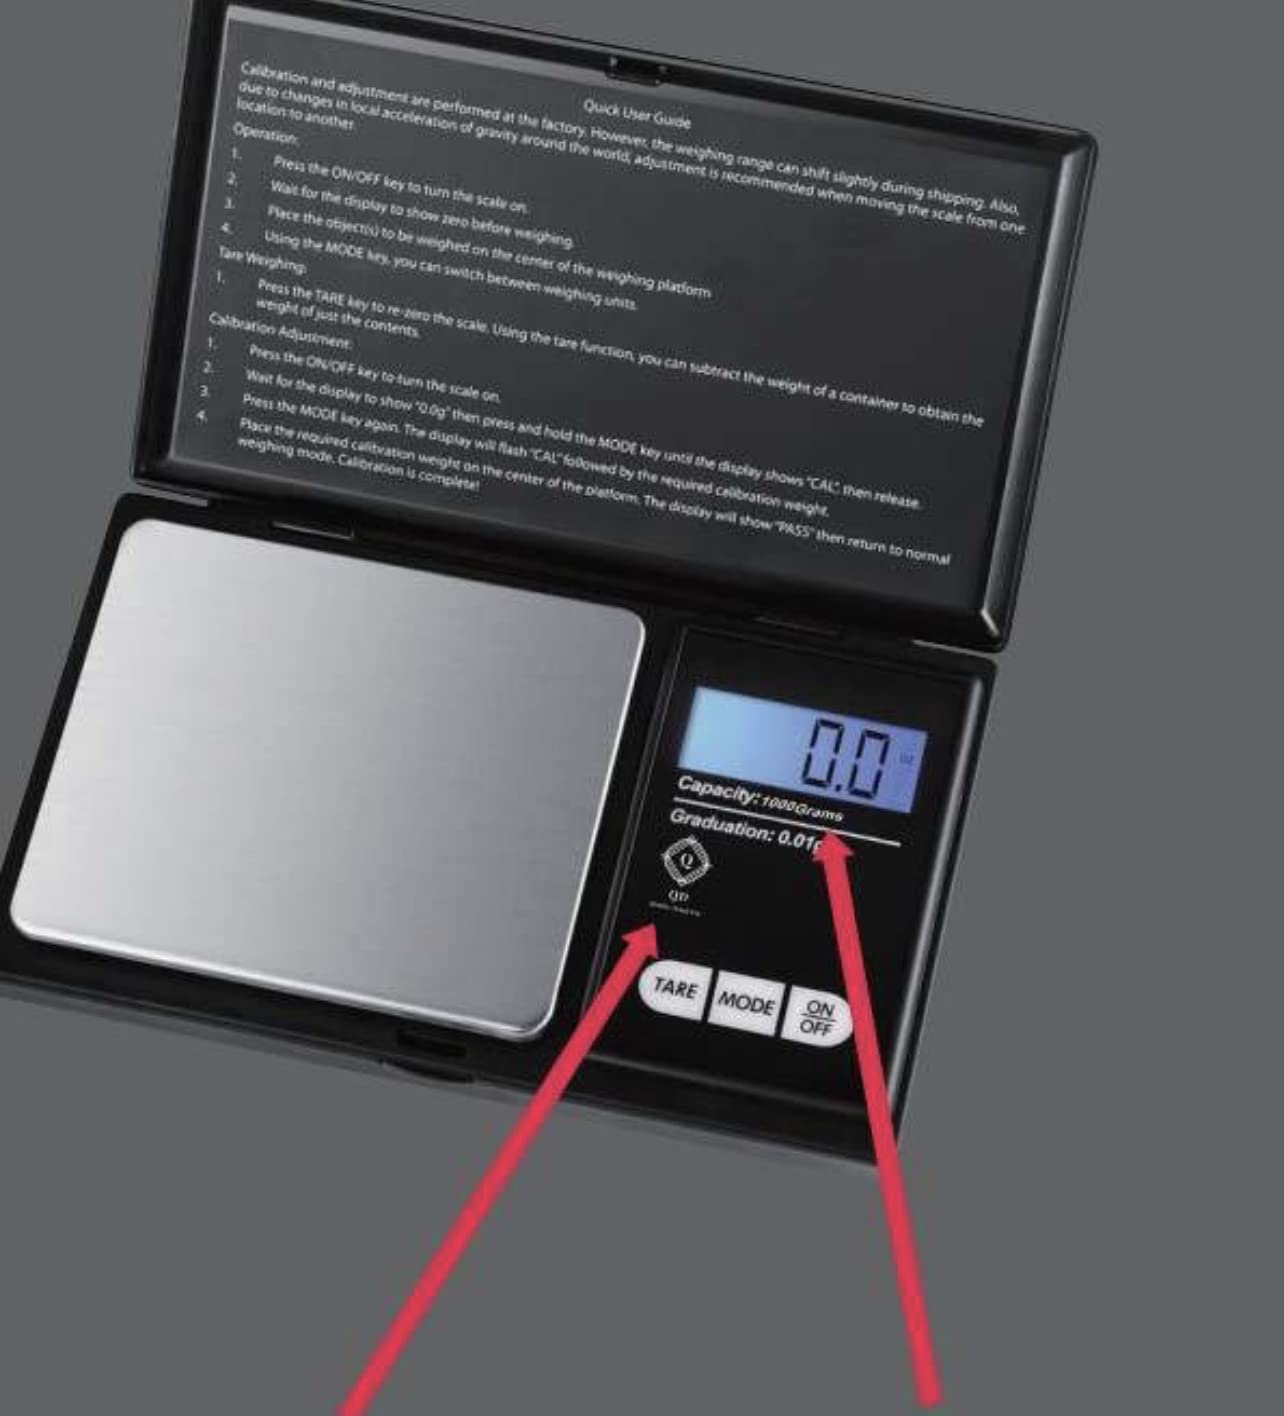 Gram Scale If Your Pocket Digital Scale Doesn't Read 1,000 Grams or Better  It's Pointless! Quality Detail Luxury Hand Held Special Edition! 1000g  which is Equal to About 2.2lbs Perfect for On